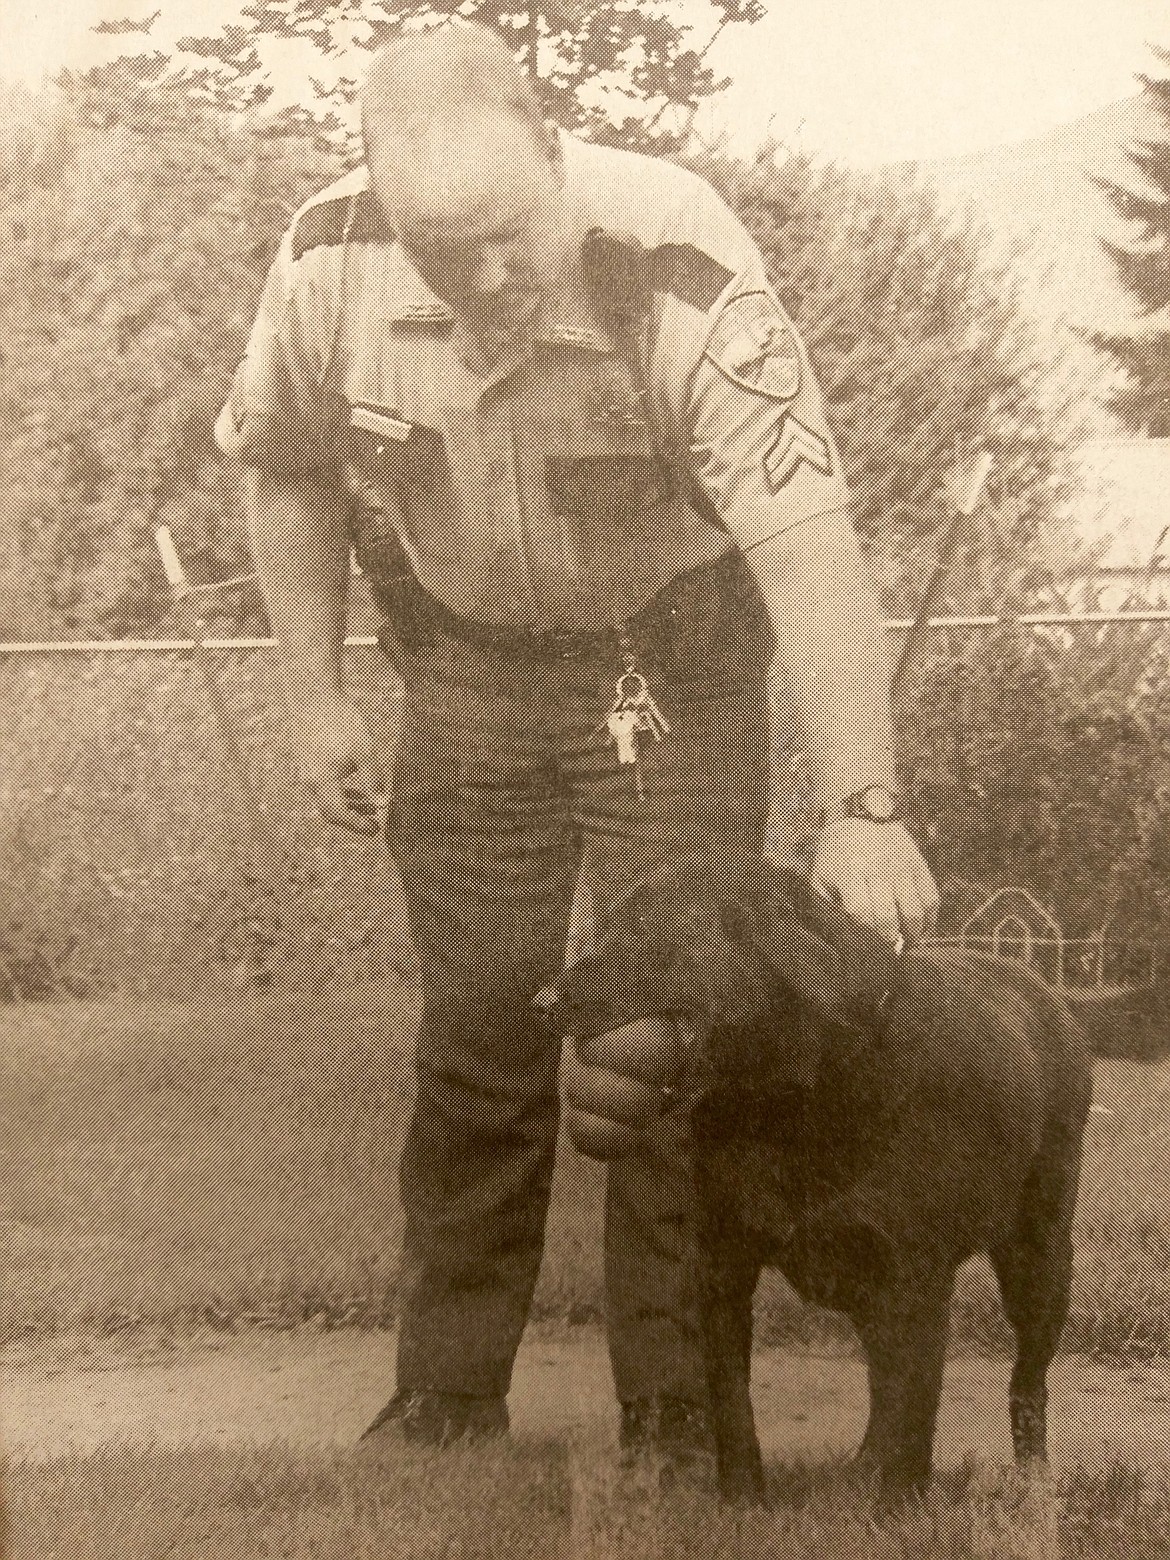 Sheriff Gunderson (then deputy) with deputy Zipper featured in a 1998 edition of the Shoshone News-Press announcing Zipper's retirement.